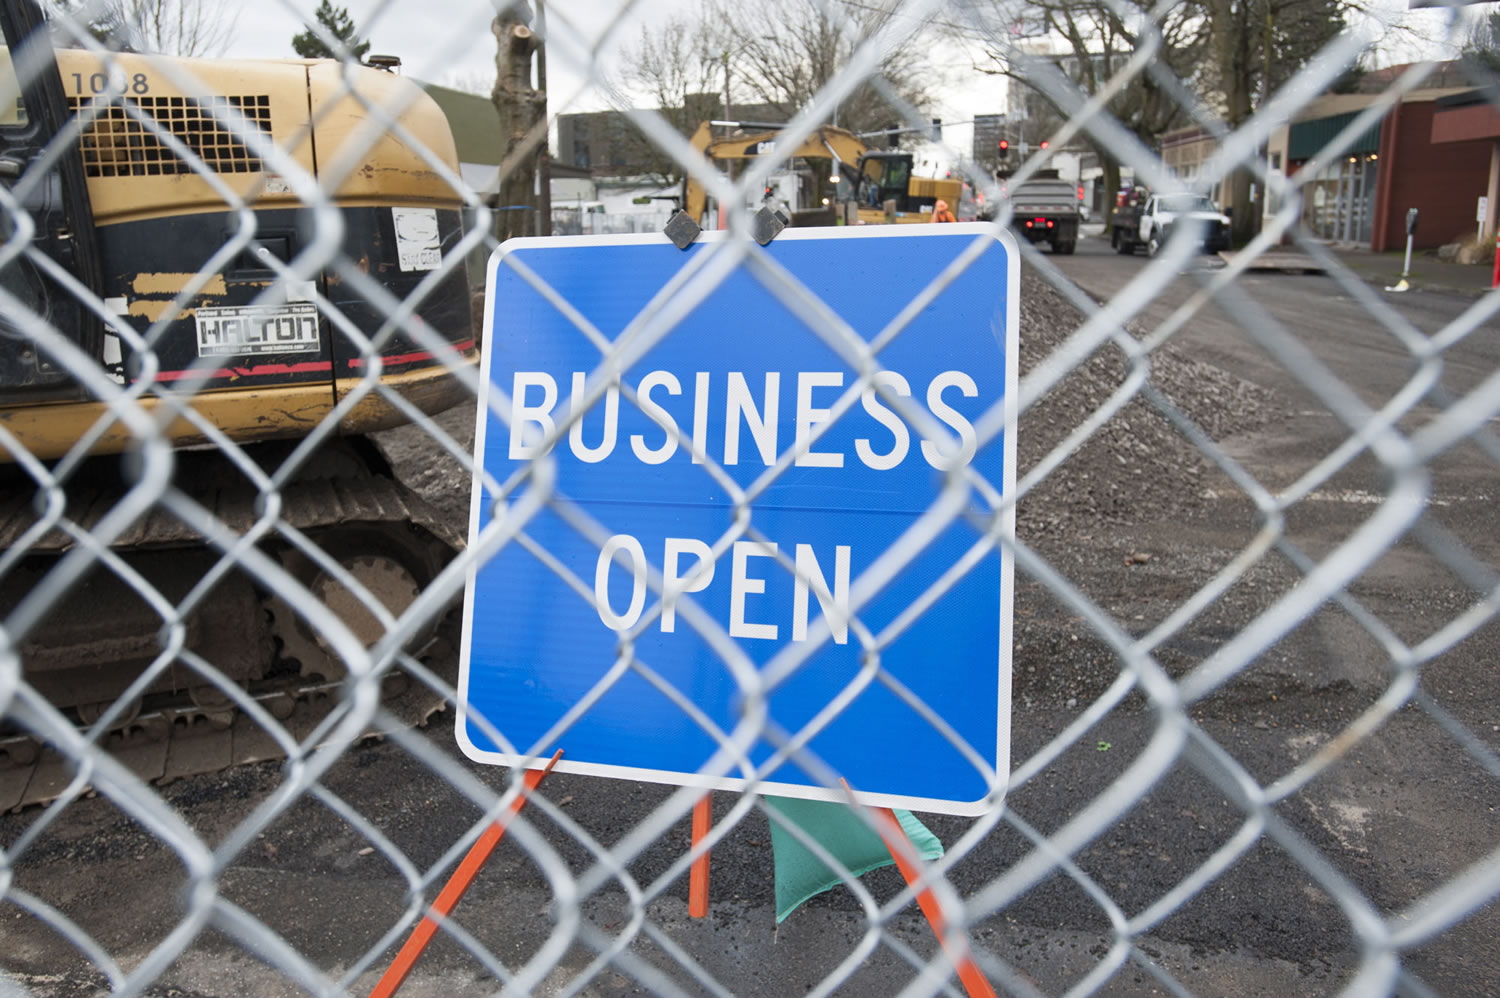 C-Tran had its contractor erect this sign after shop owners complained about road work obstructing customer access to their businesses.